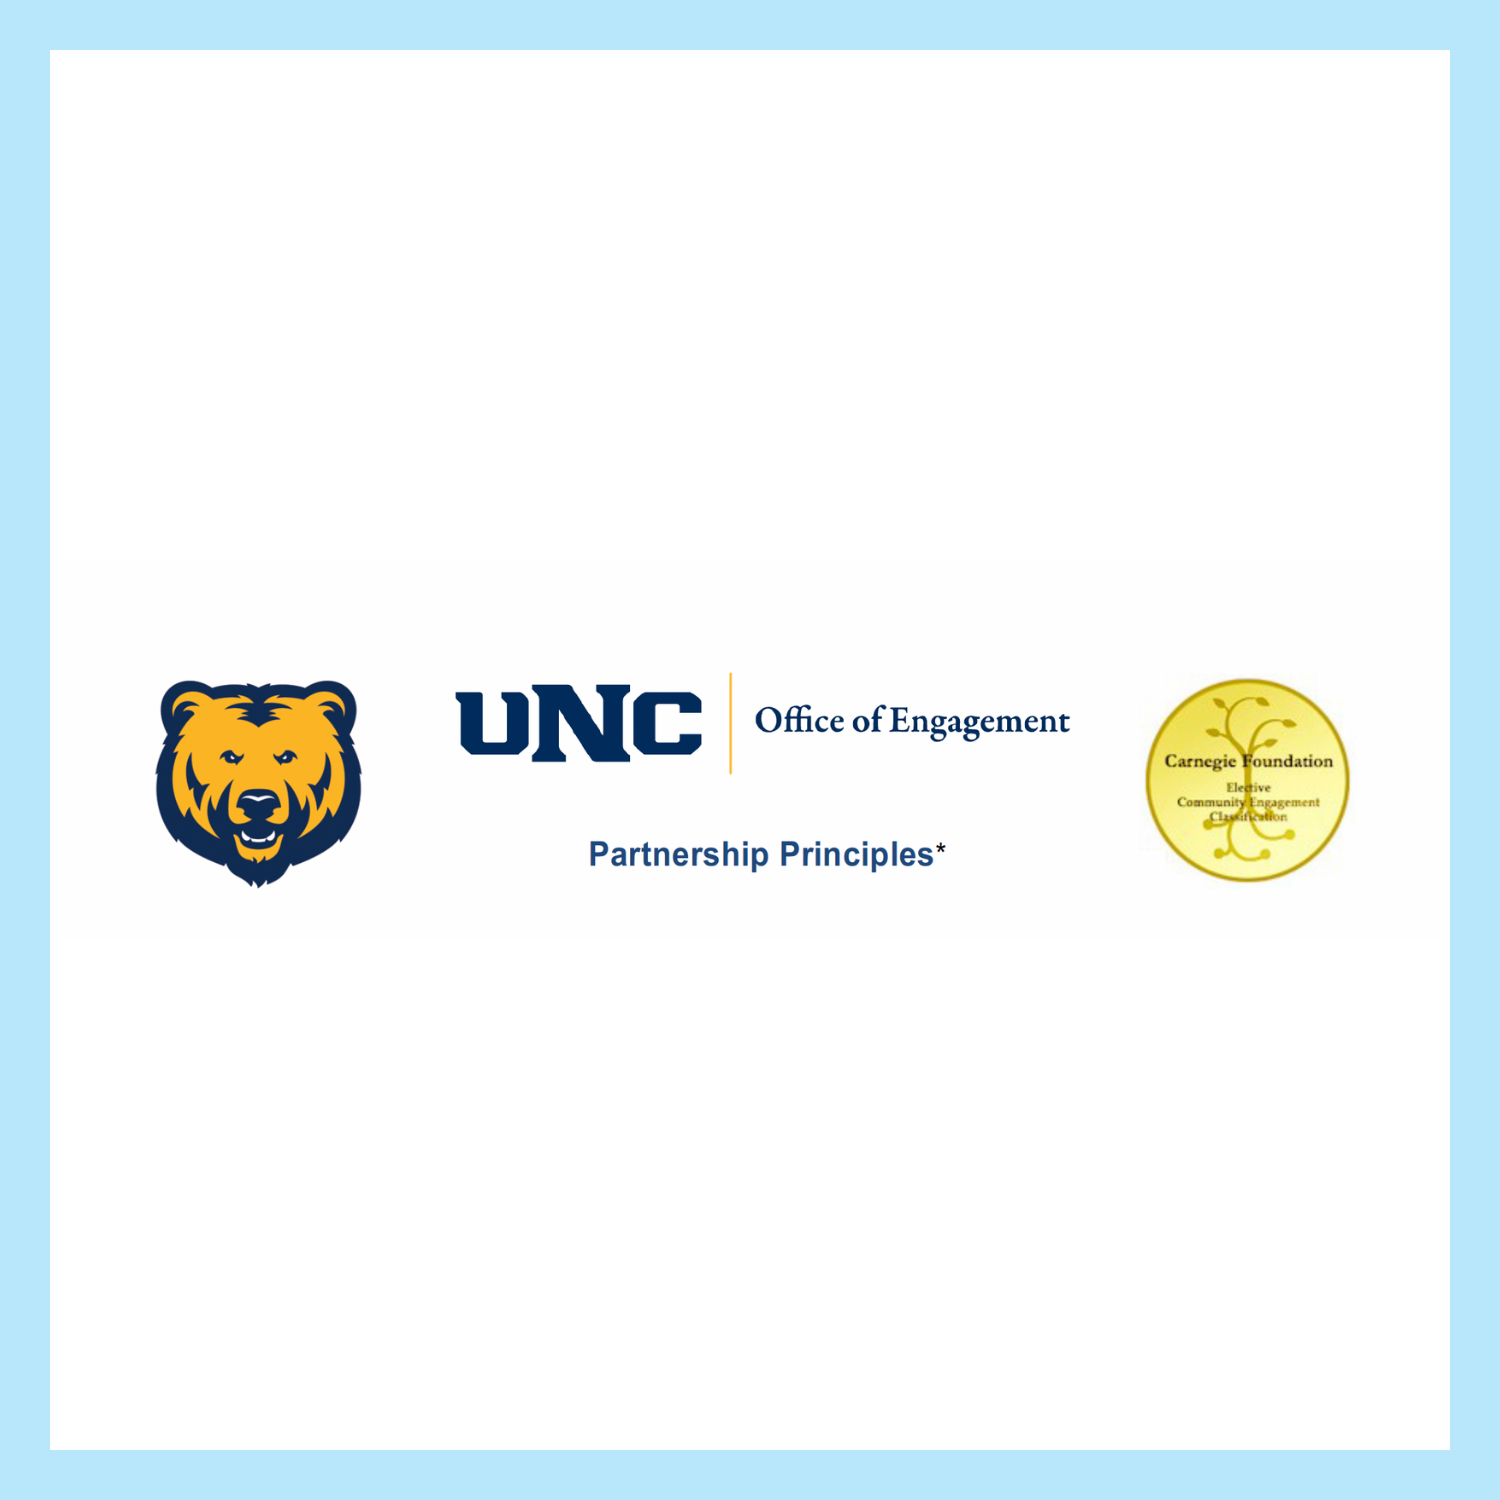 UNC Logo of a yellow bear and "Office of Engagement" written with "Partnership Principles" underneath. A  yellow seal that reads Carnegie Foundation elective community engagement classification.